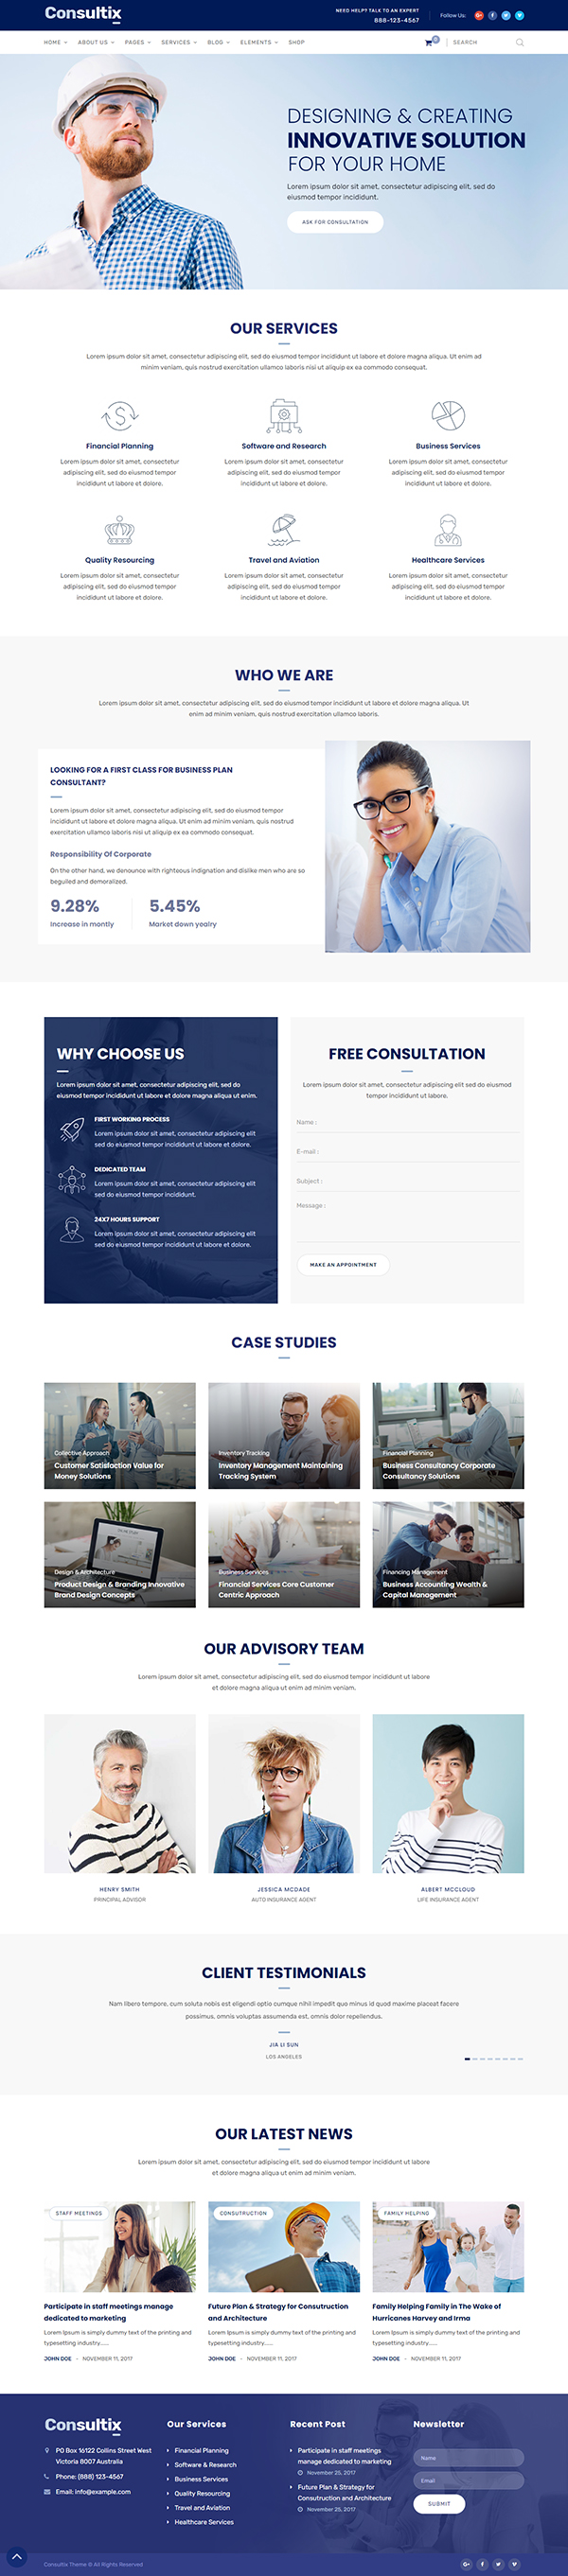 Consultix – Business Consulting WordPress Theme